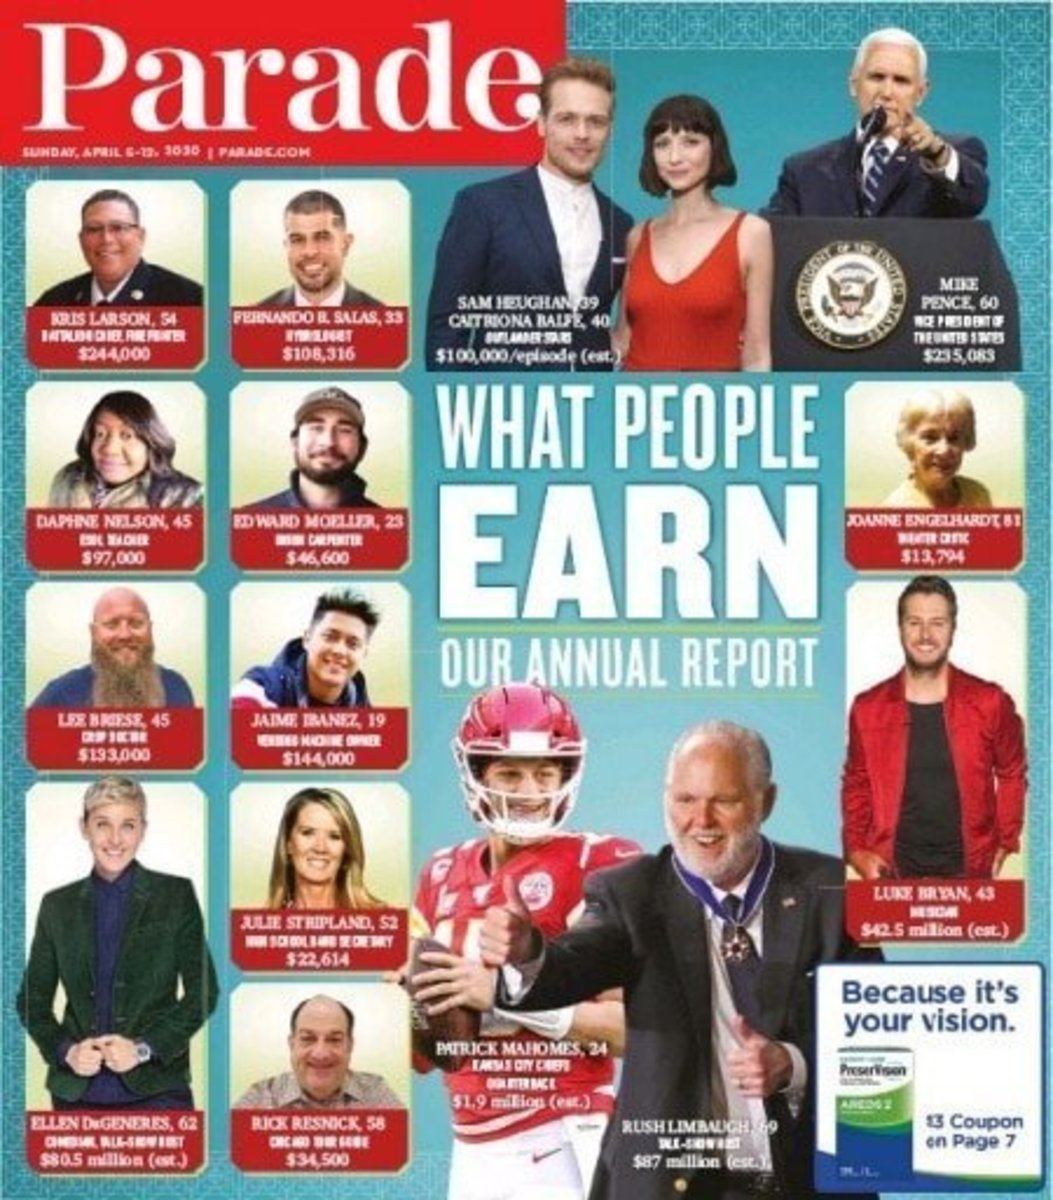 'Parade' Magazine Tells Us What People Earn How About a Maximum Wage